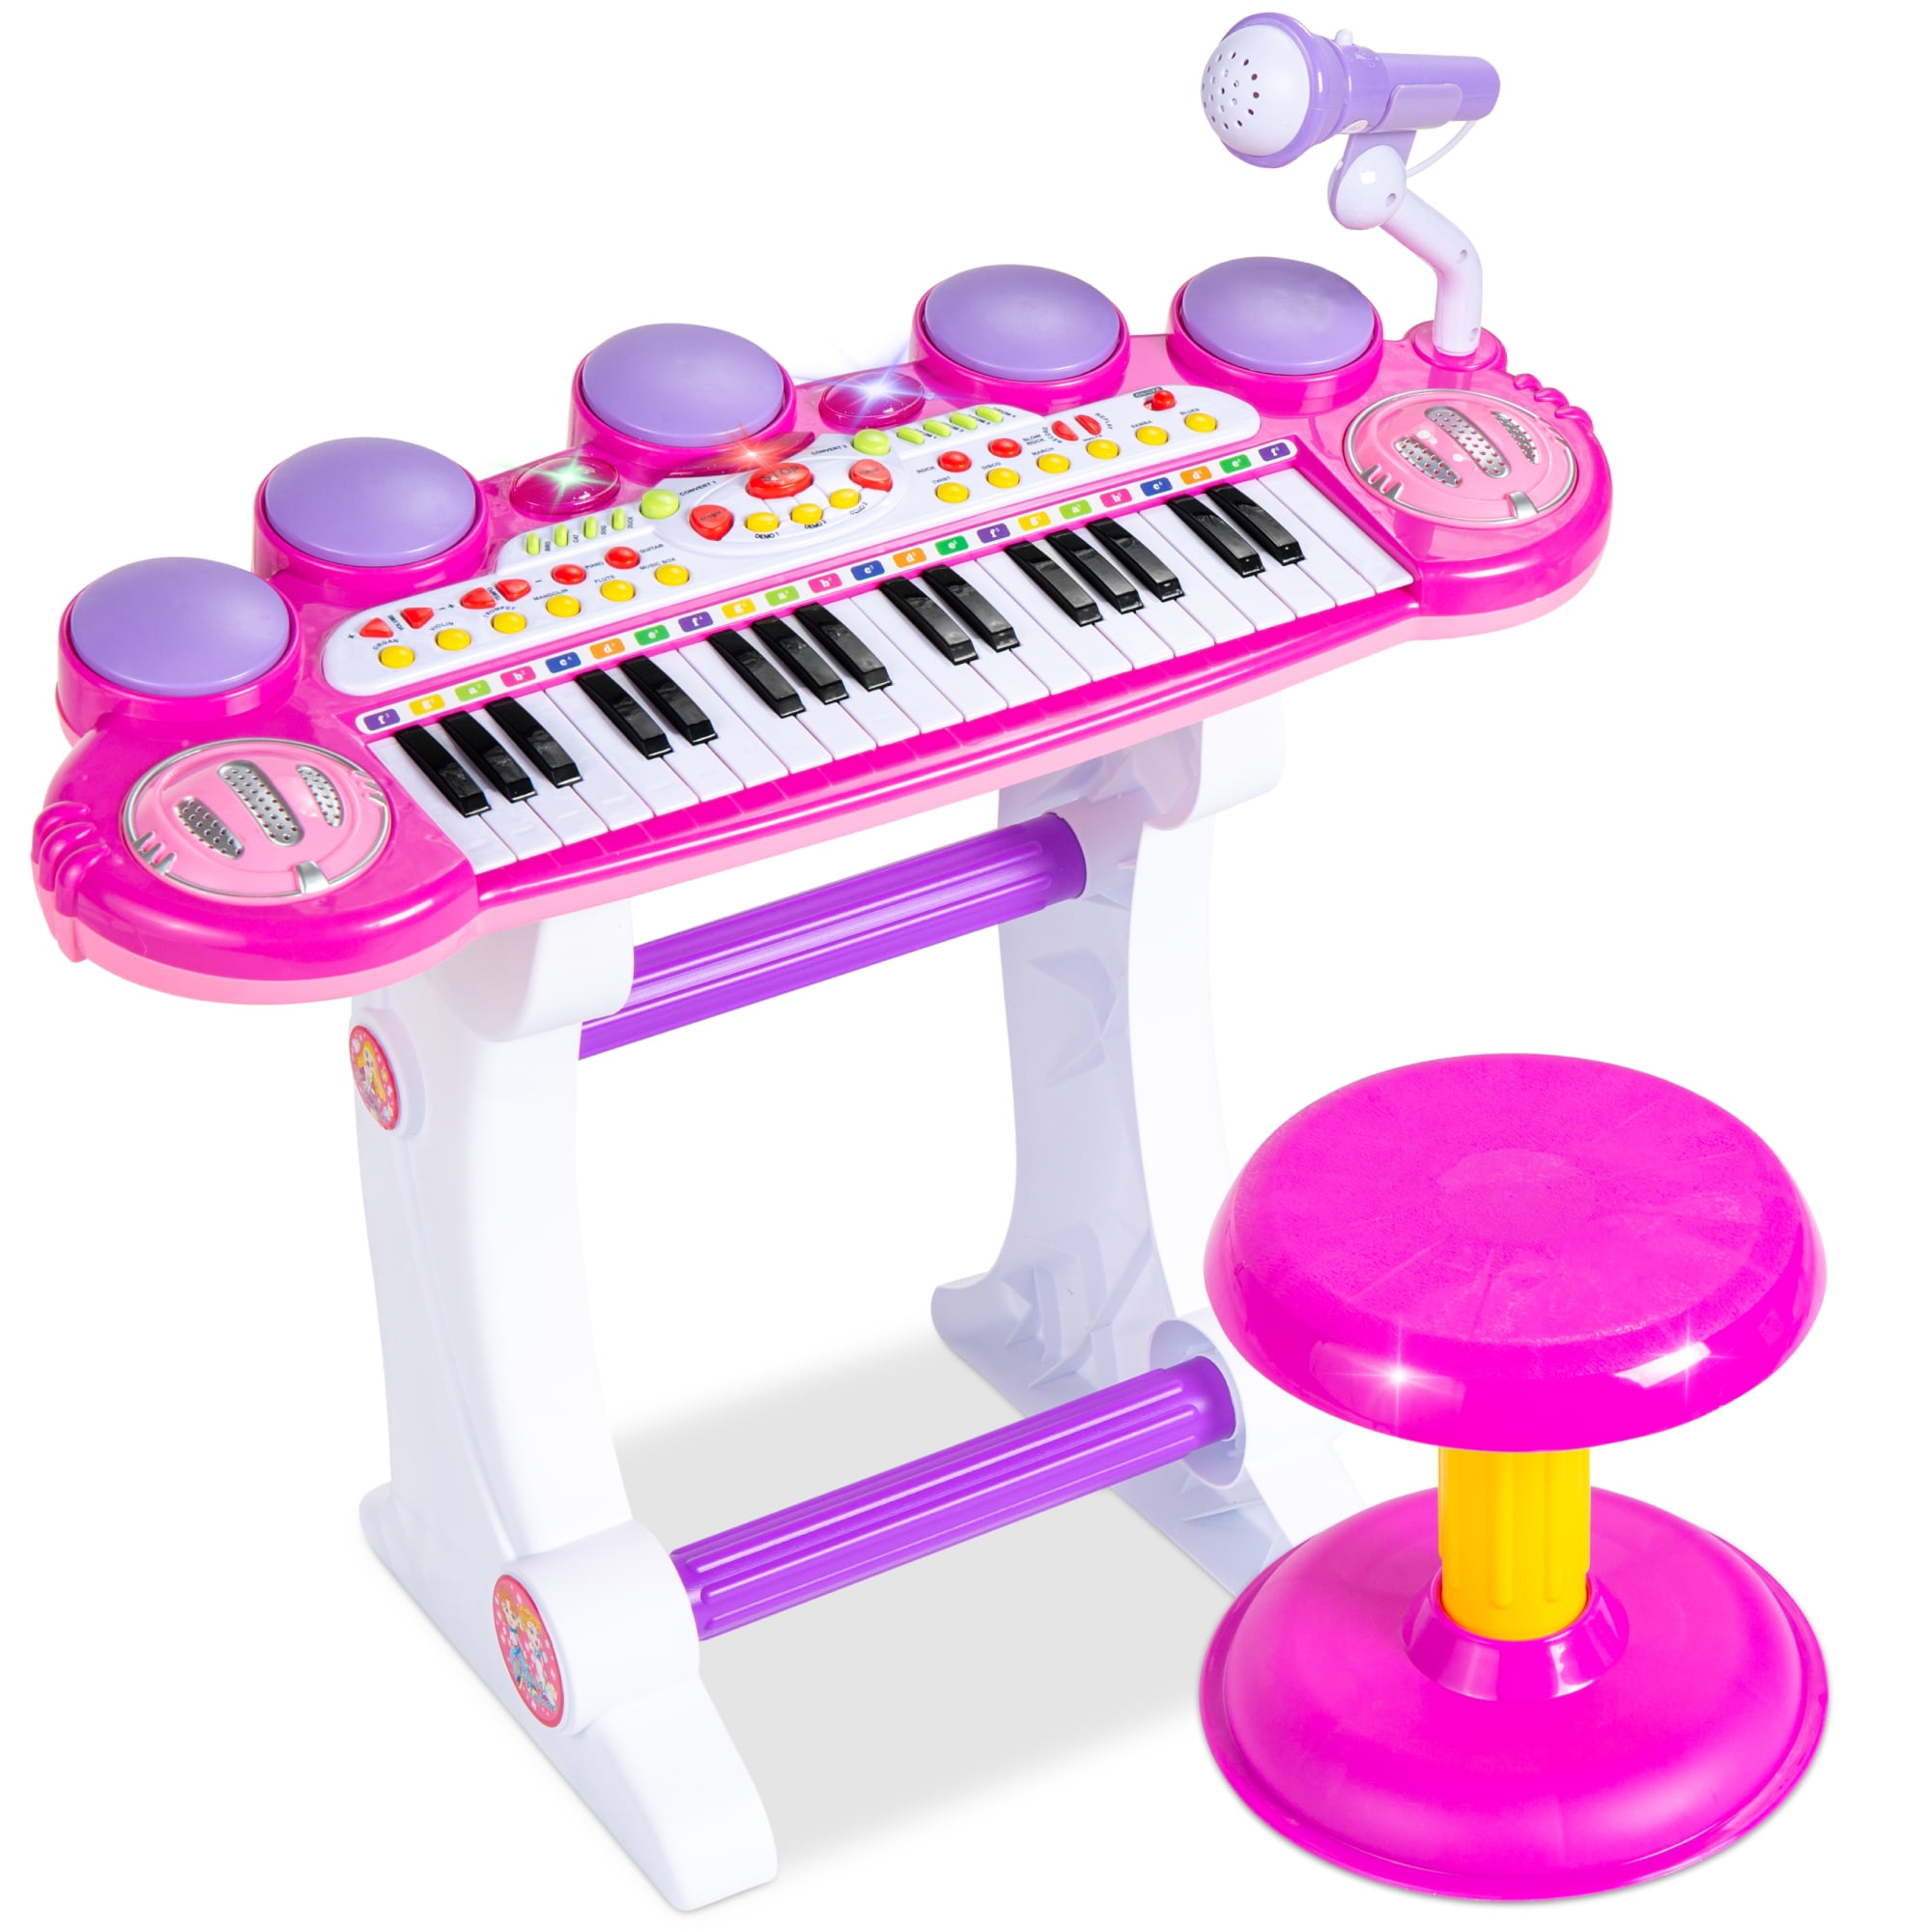 37 Key Kids Electronic Keyboard Piano Musical Toy with Microphone for Children’s